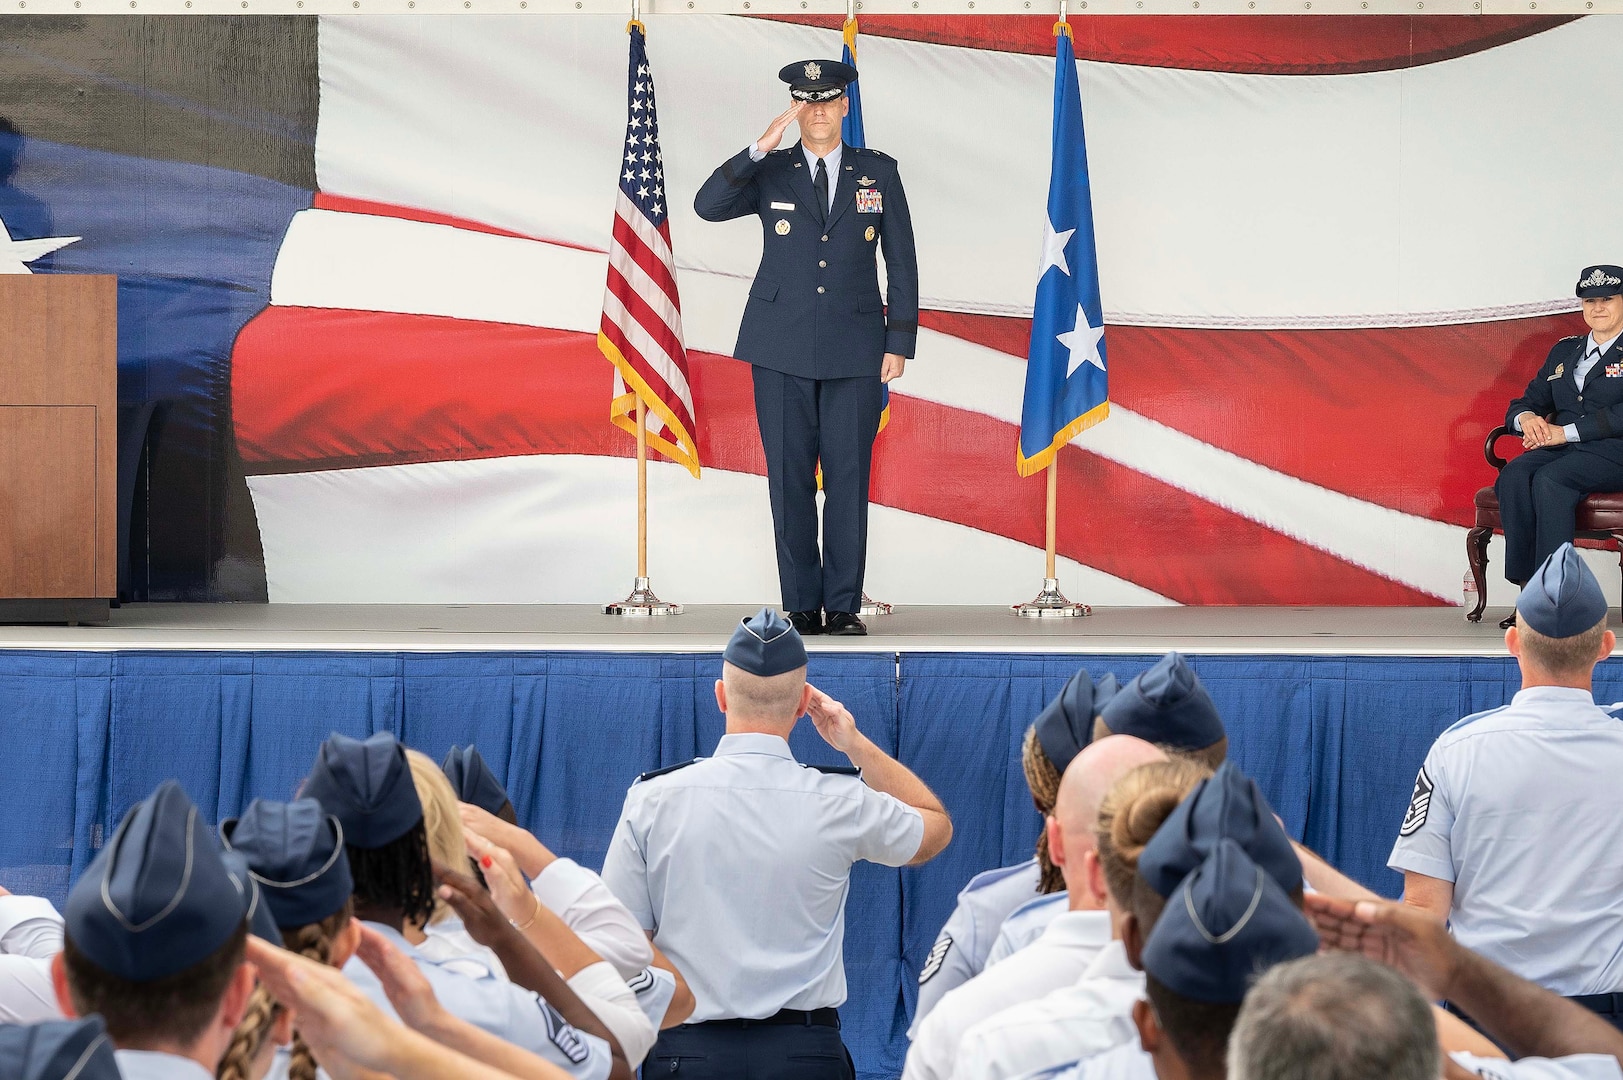 U.S. Air Force Brig. Gen. Jefferson J. O’Donnell, Air Force Personnel Center commander, renders his first salute to his command during the AFPC change of command ceremony June 20 at Joint Base San Antonio-Randolph, Texas. Prior to taking command at AFPC, O’Donnell served as the Director of Regional Affairs for the Deputy Under Secretary of the Air Force, International Affairs.